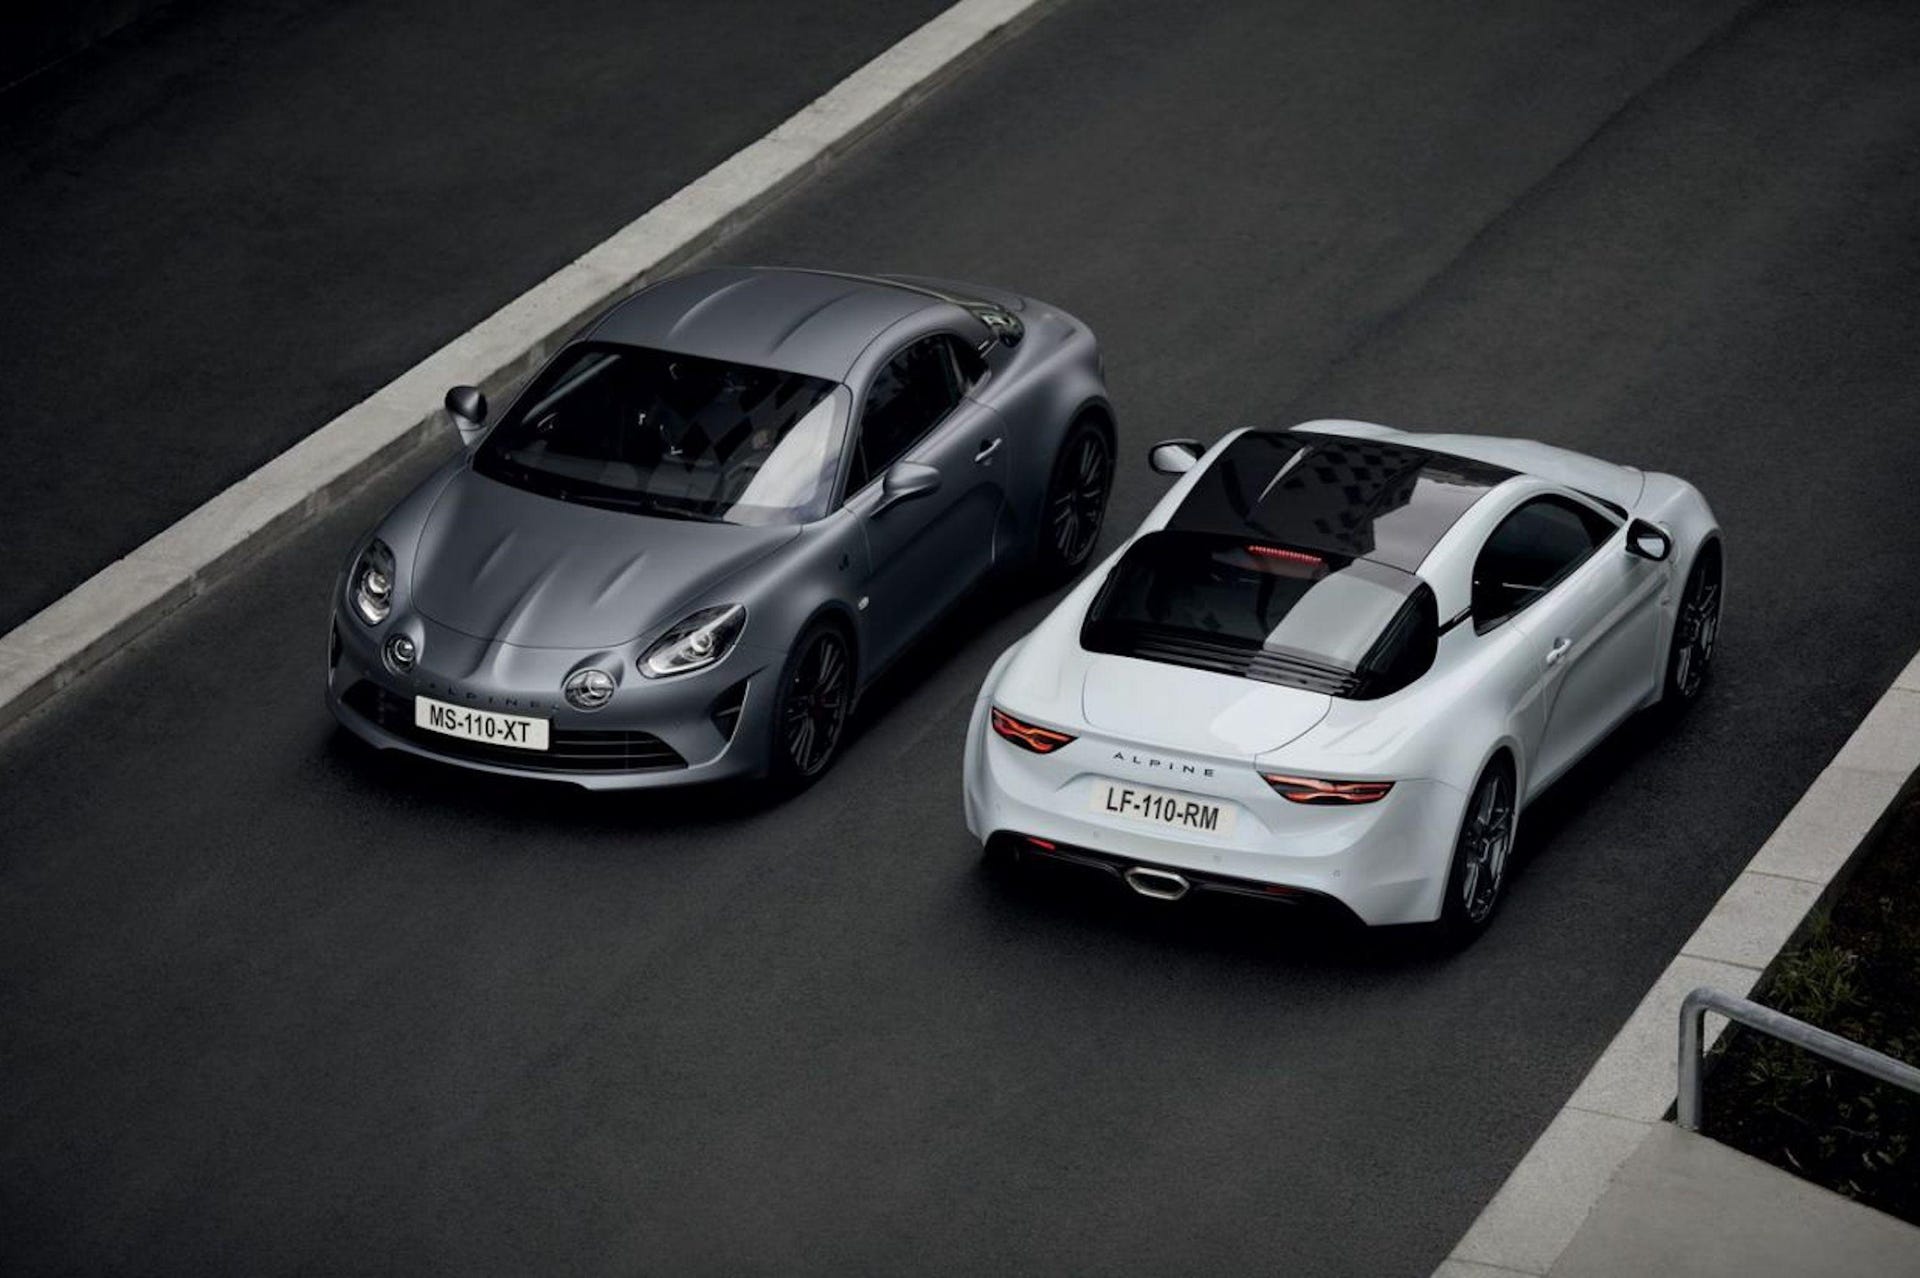 The Alpine A110 is getting a faster S version and we're madder